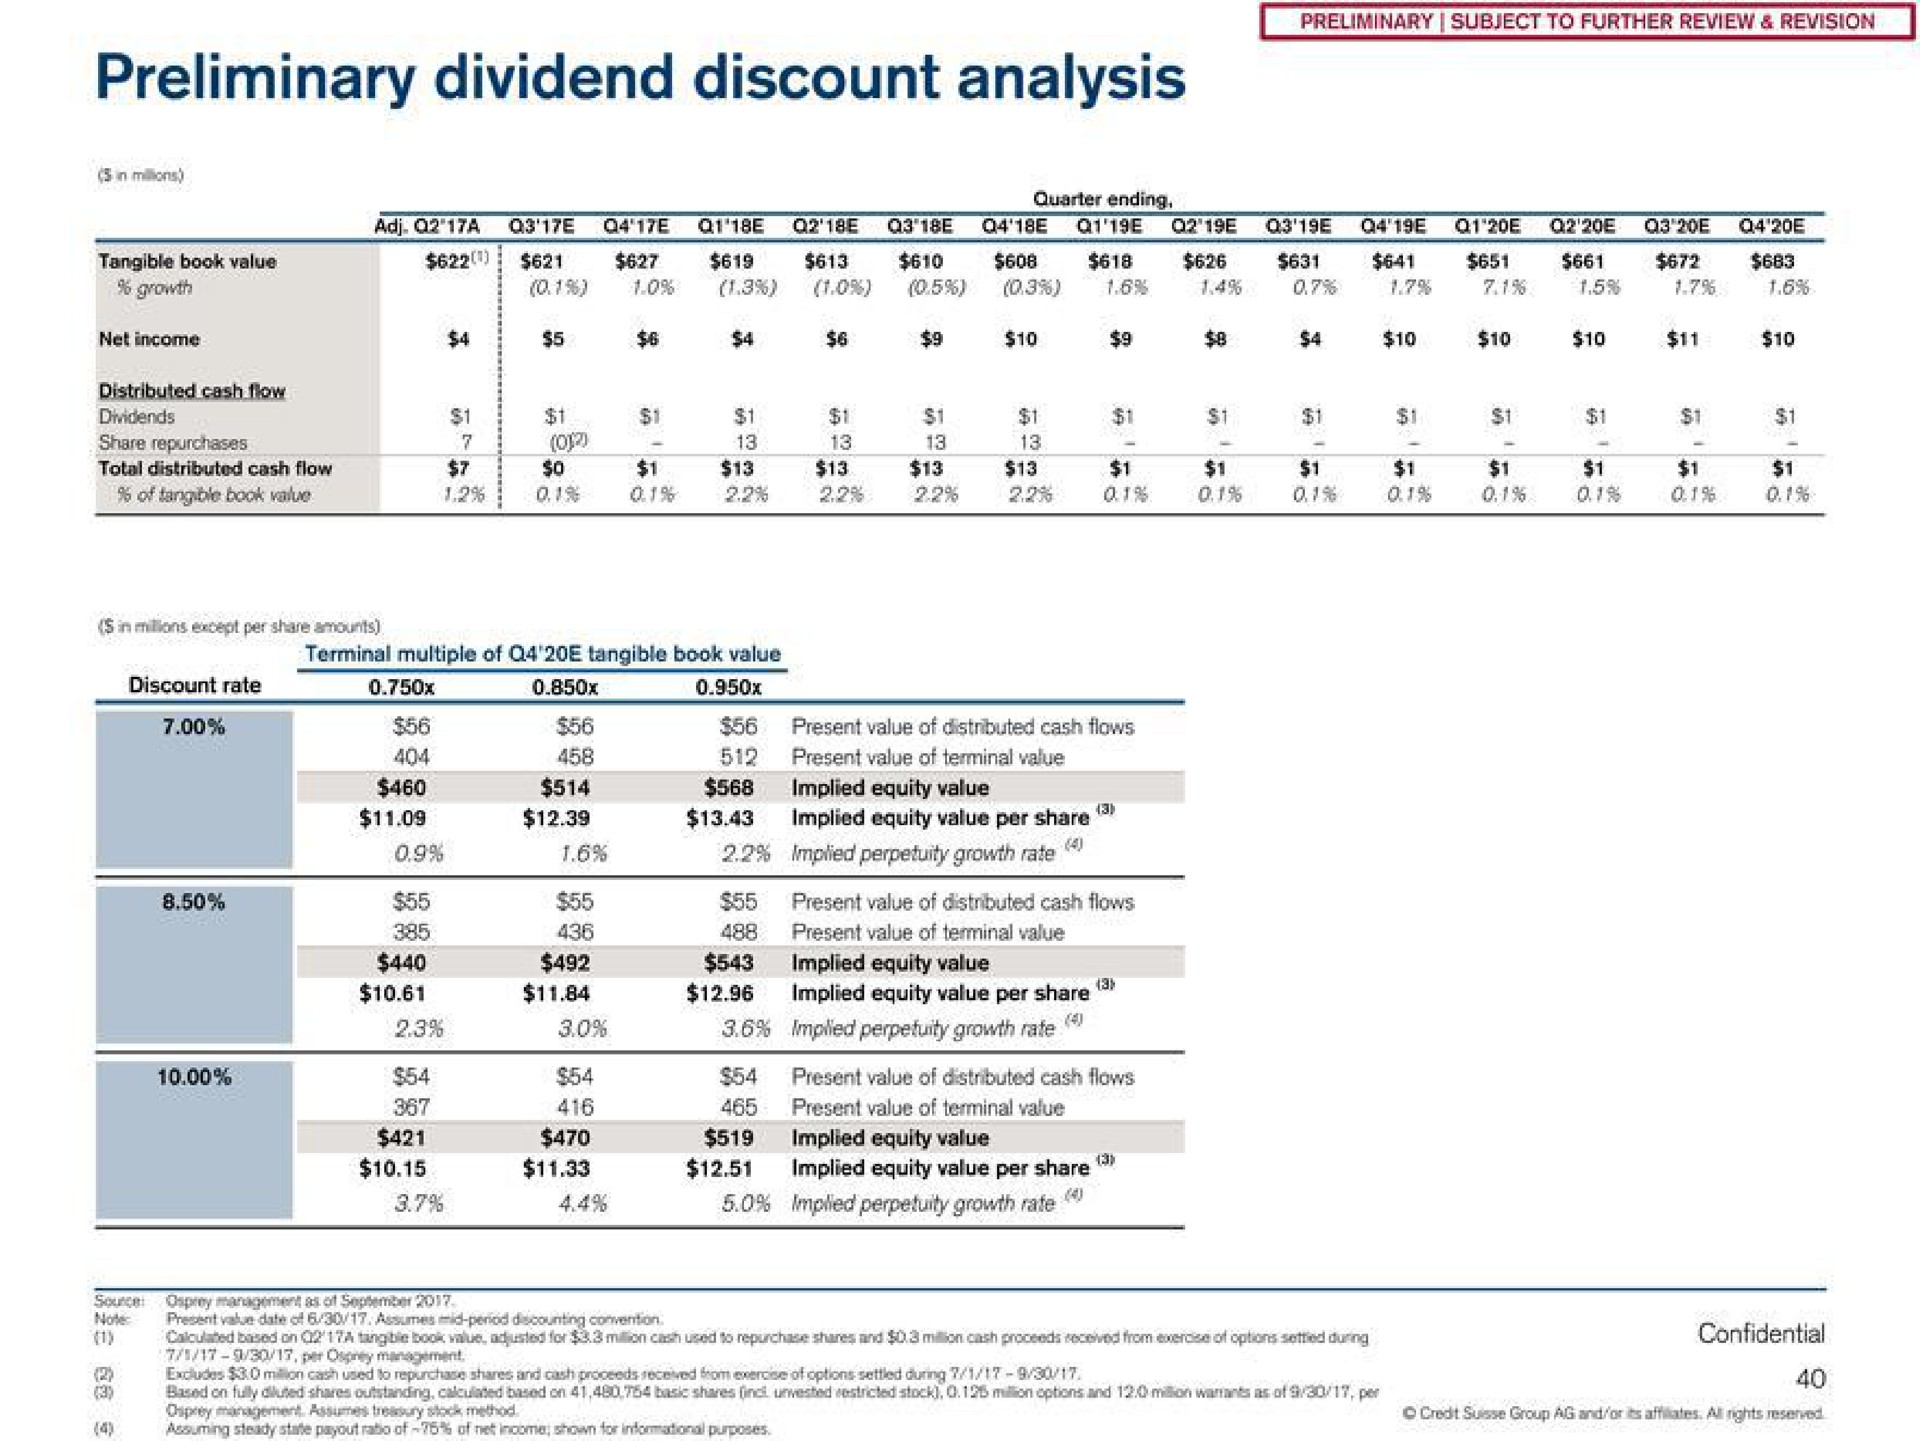 preliminary dividend discount analysis | Credit Suisse